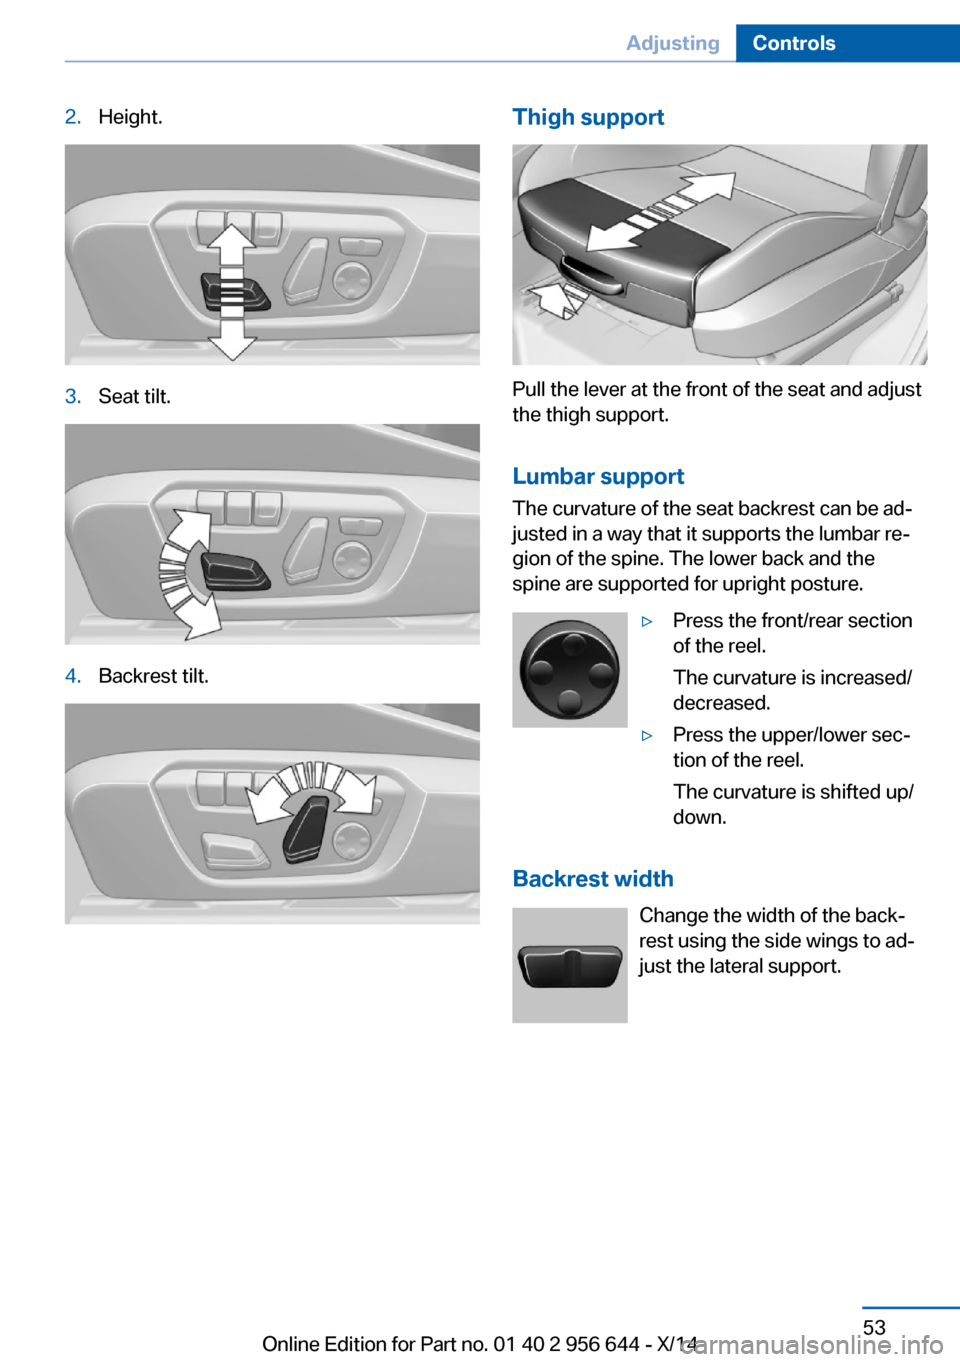 BMW X3 2014 F25 Owners Manual 2.Height.3.Seat tilt.4.Backrest tilt.Thigh support
Pull the lever at the front of the seat and adjust
the thigh support.
Lumbar support The curvature of the seat backrest can be ad‐
justed in a way 